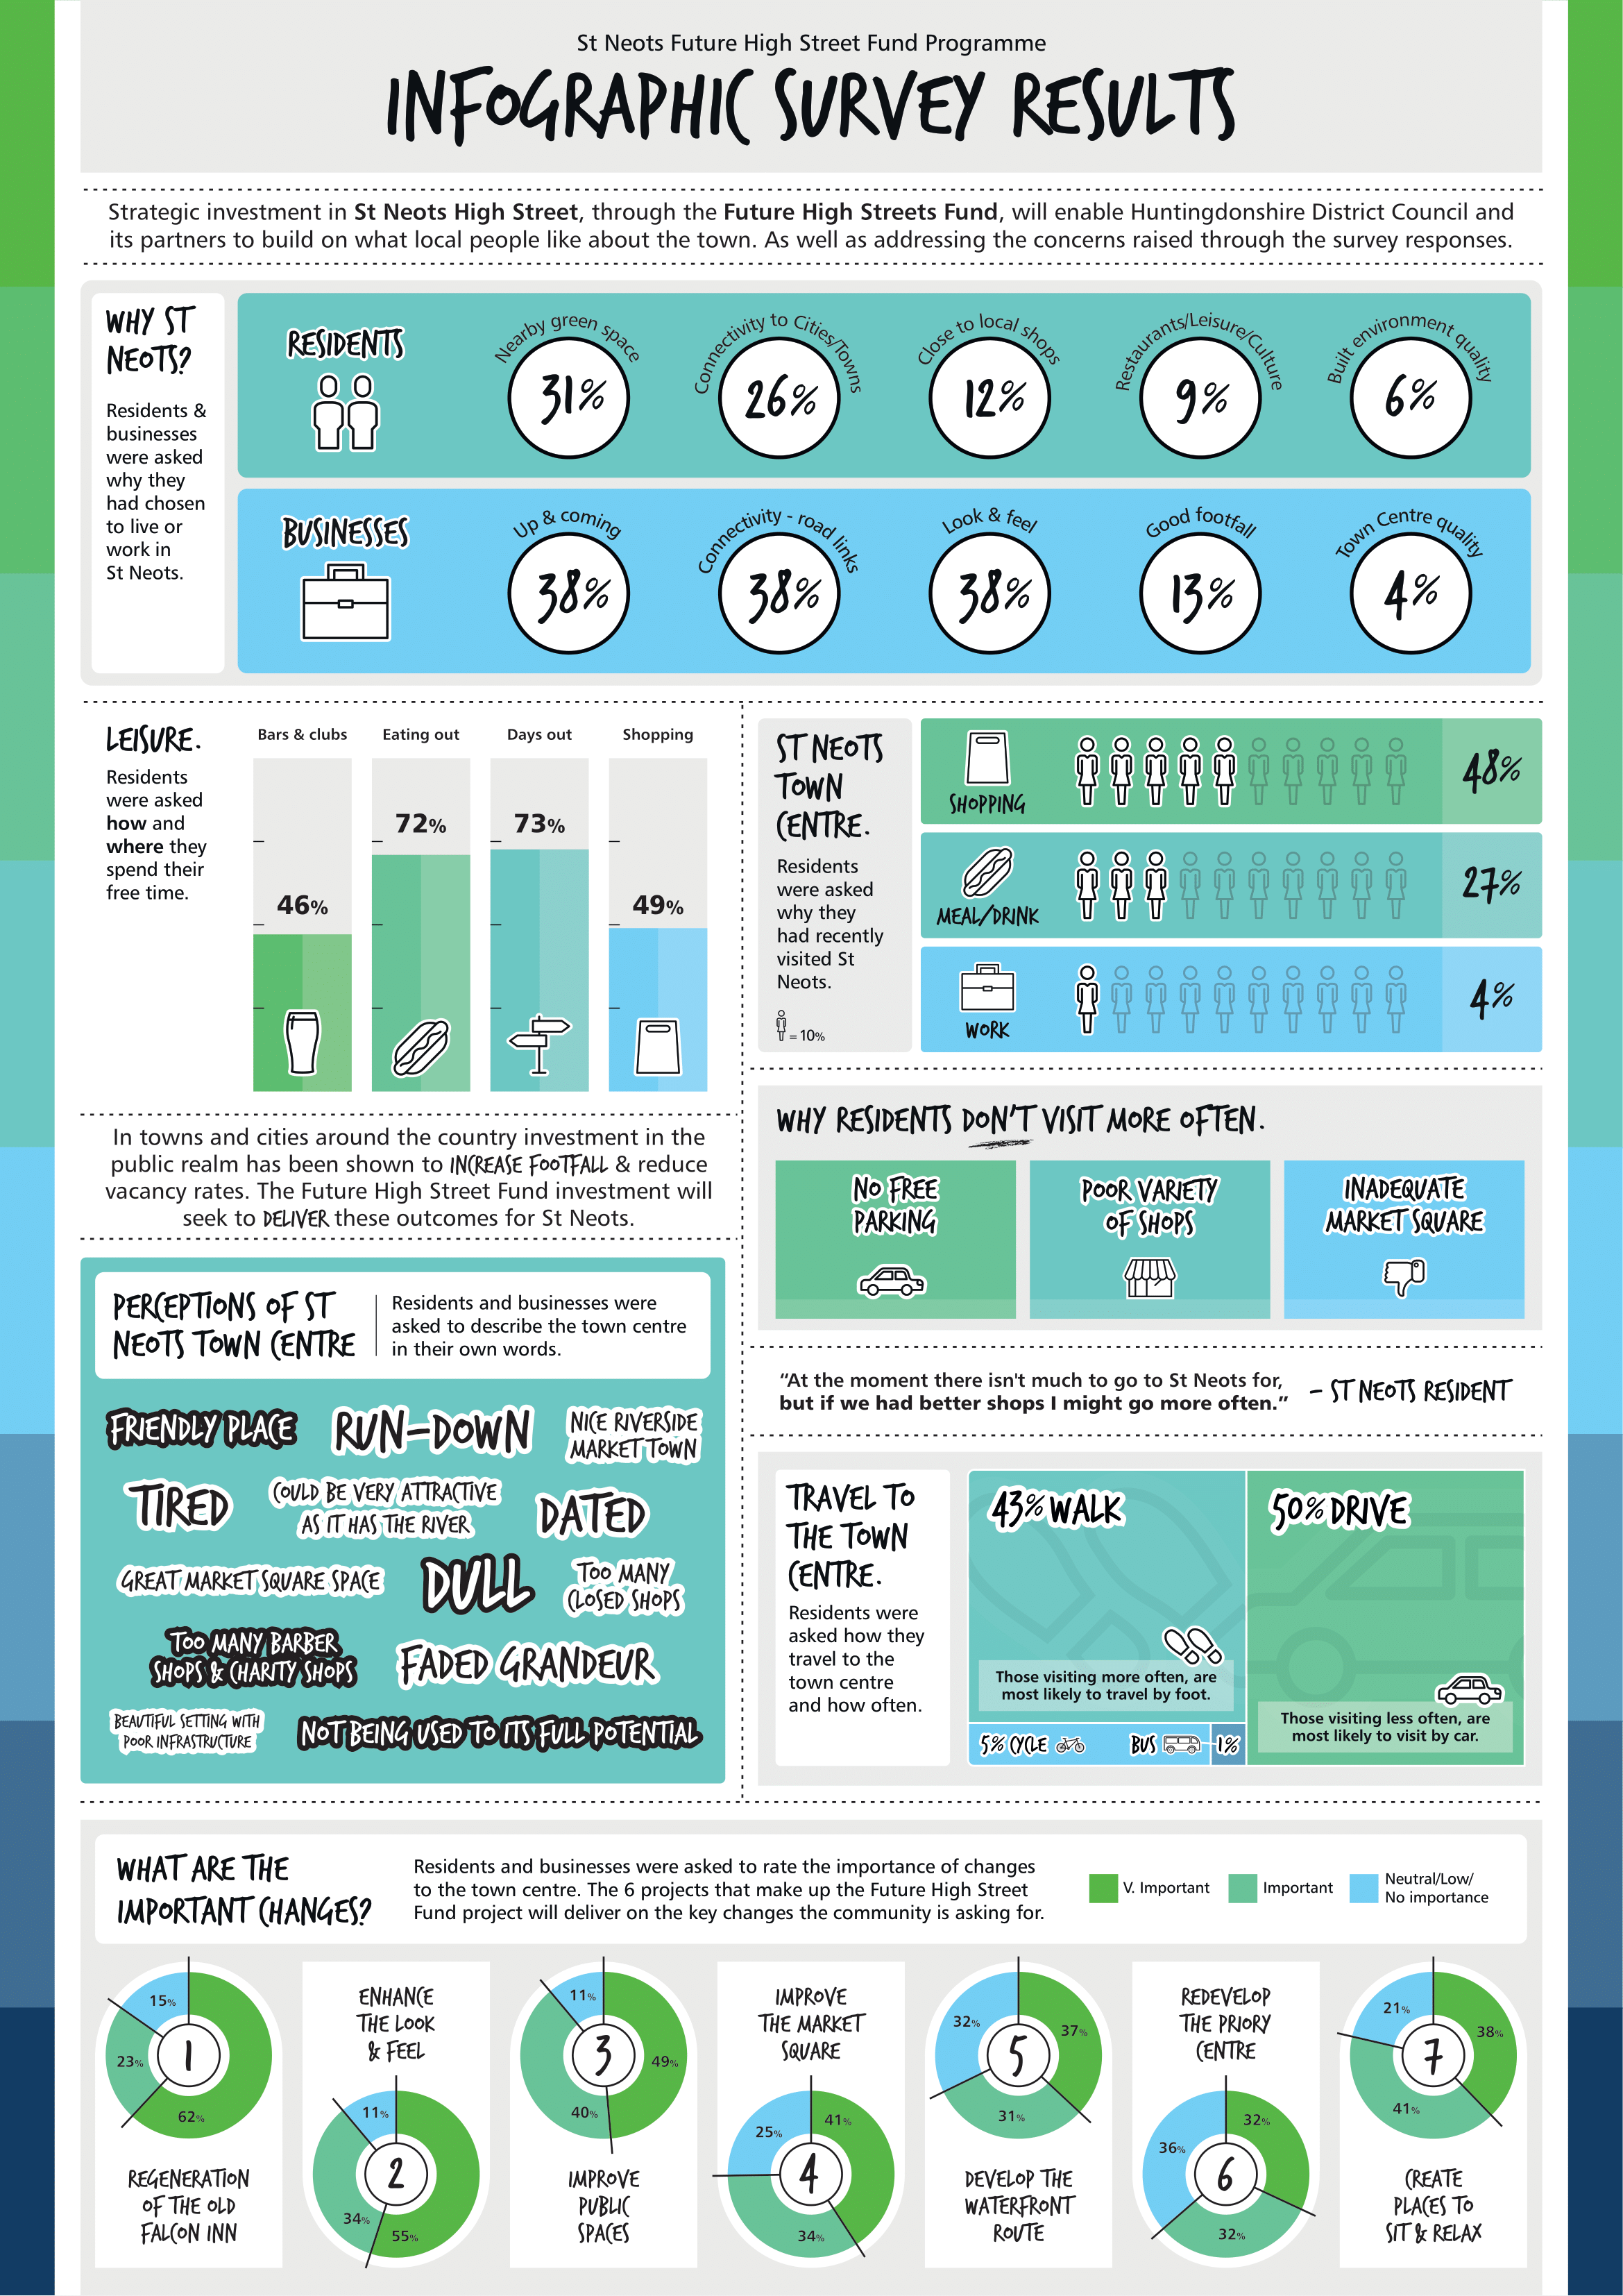 Infographic showing the main results of the survey.